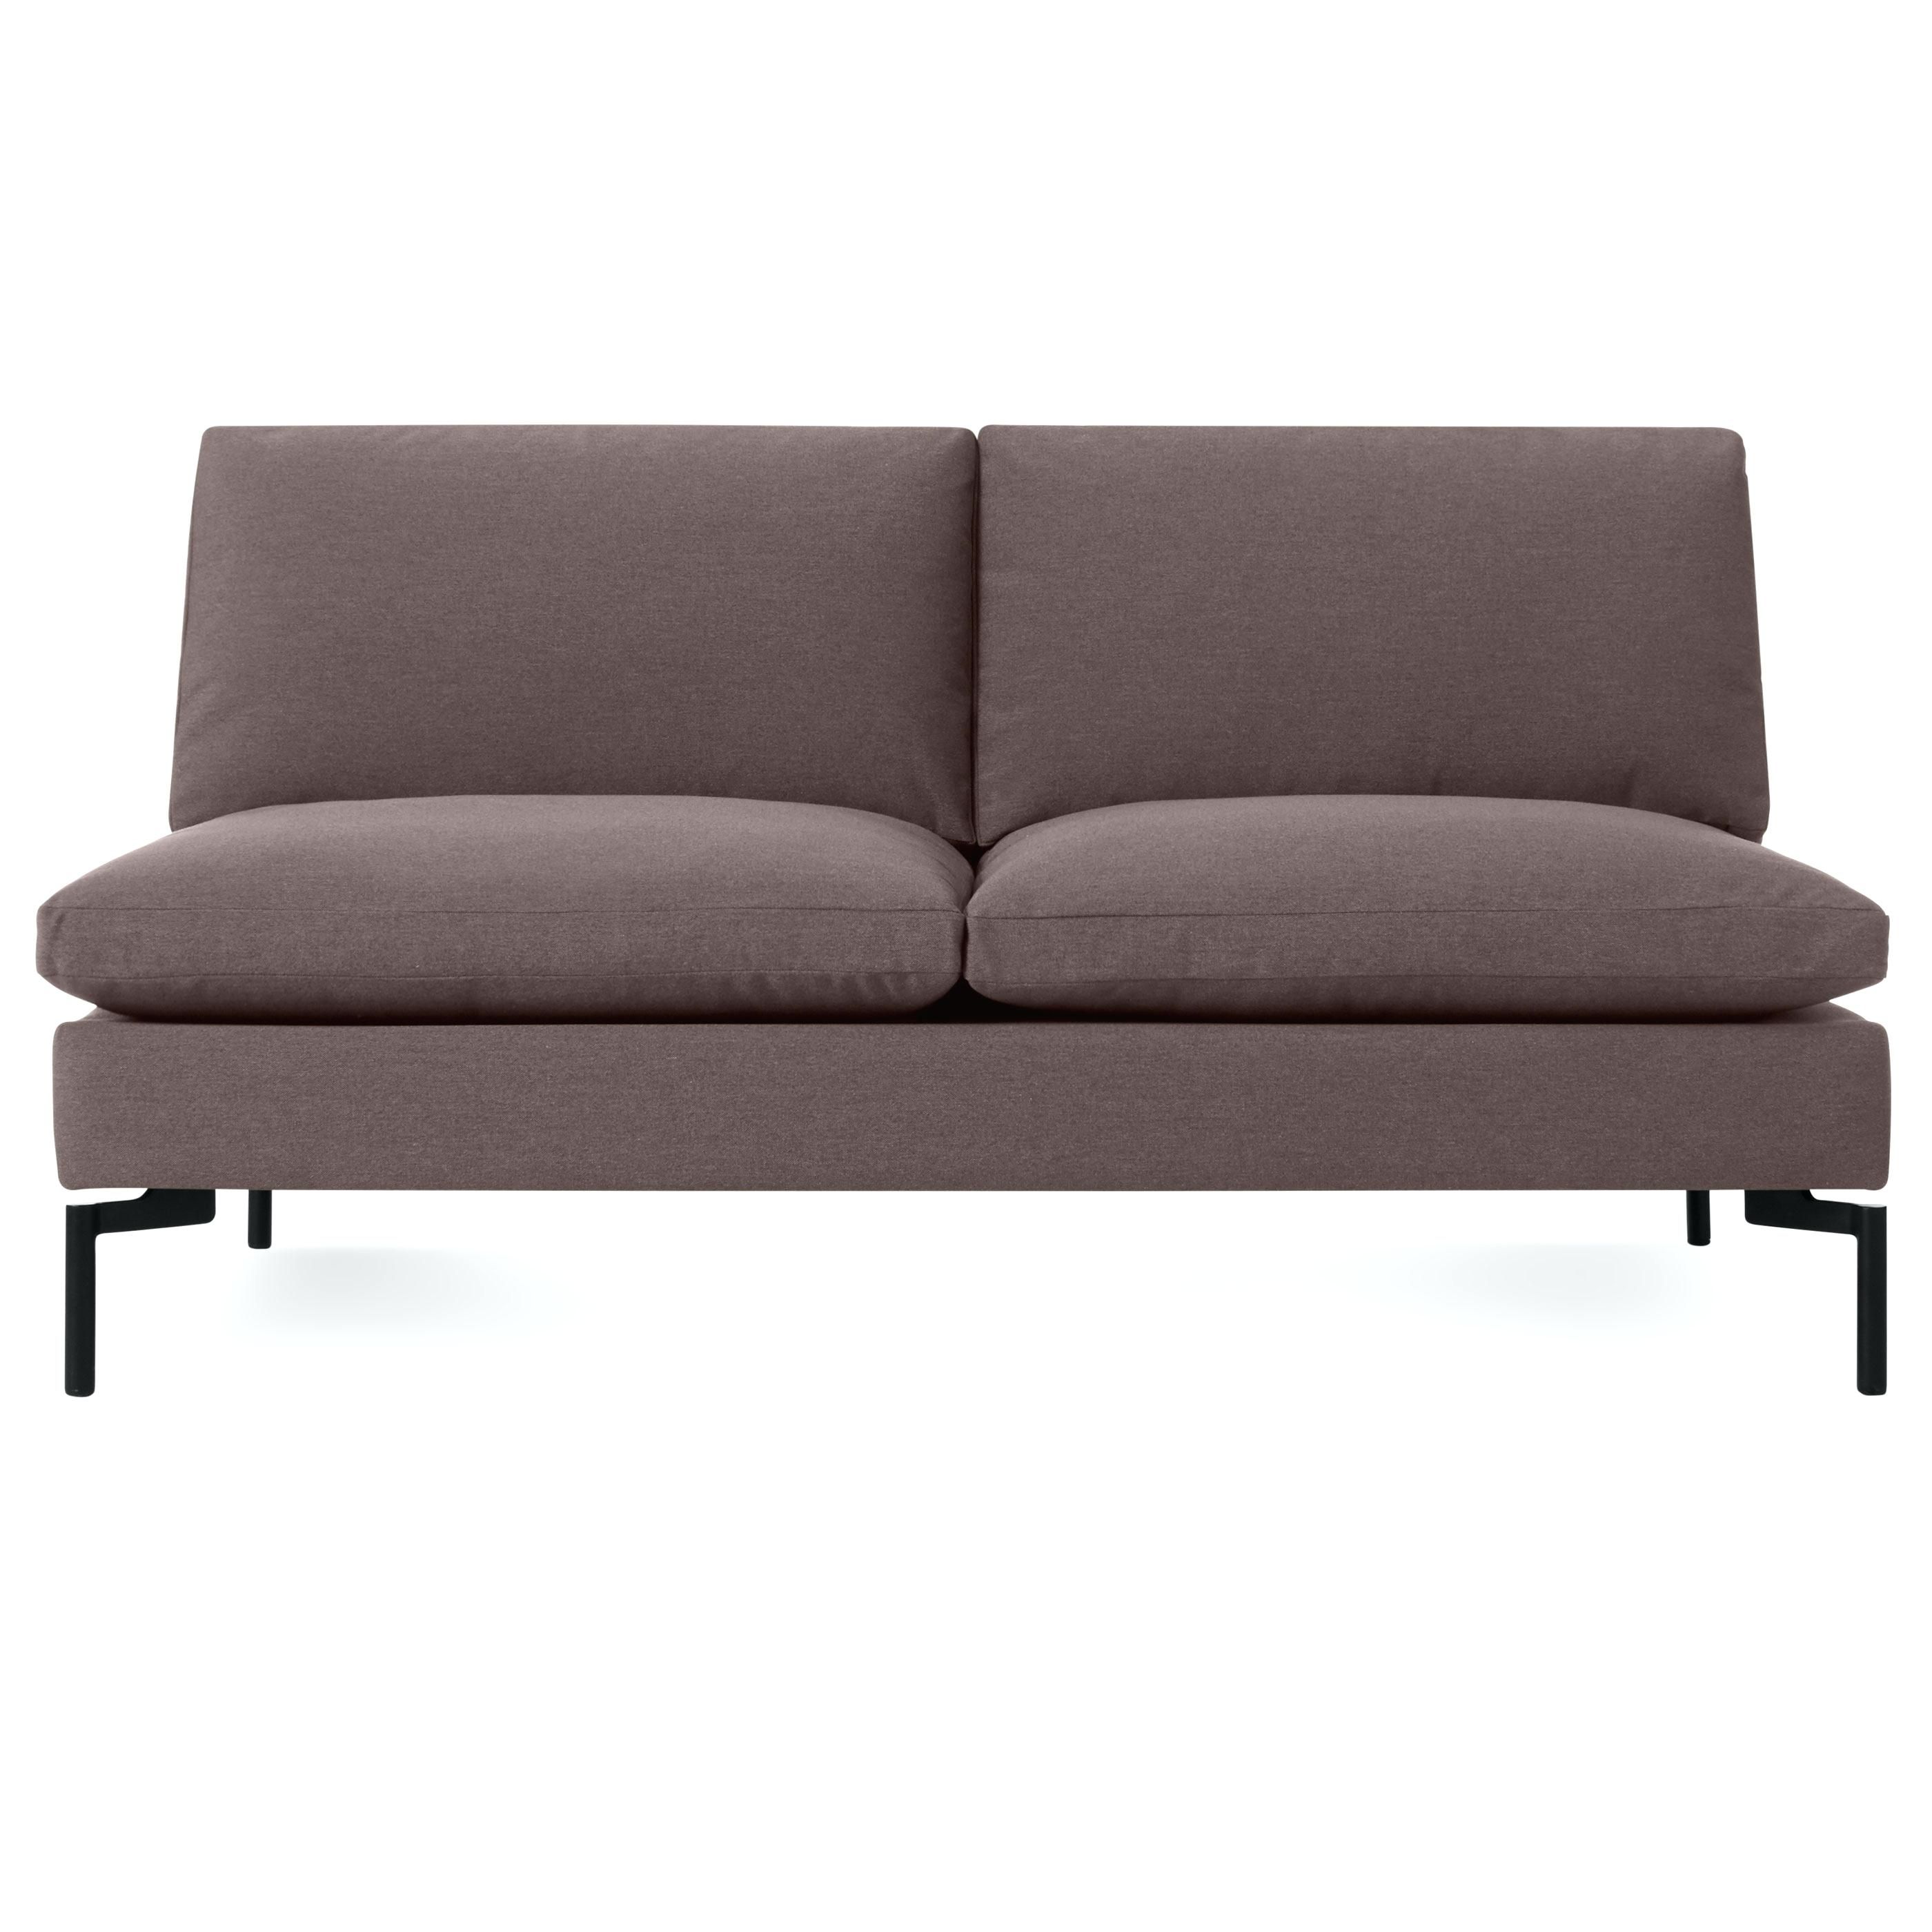 Armless Sofas Sectional For Small Spaces Sofa Bed Australia Sale Within Most Recently Released Small Armless Sofas (View 4 of 15)